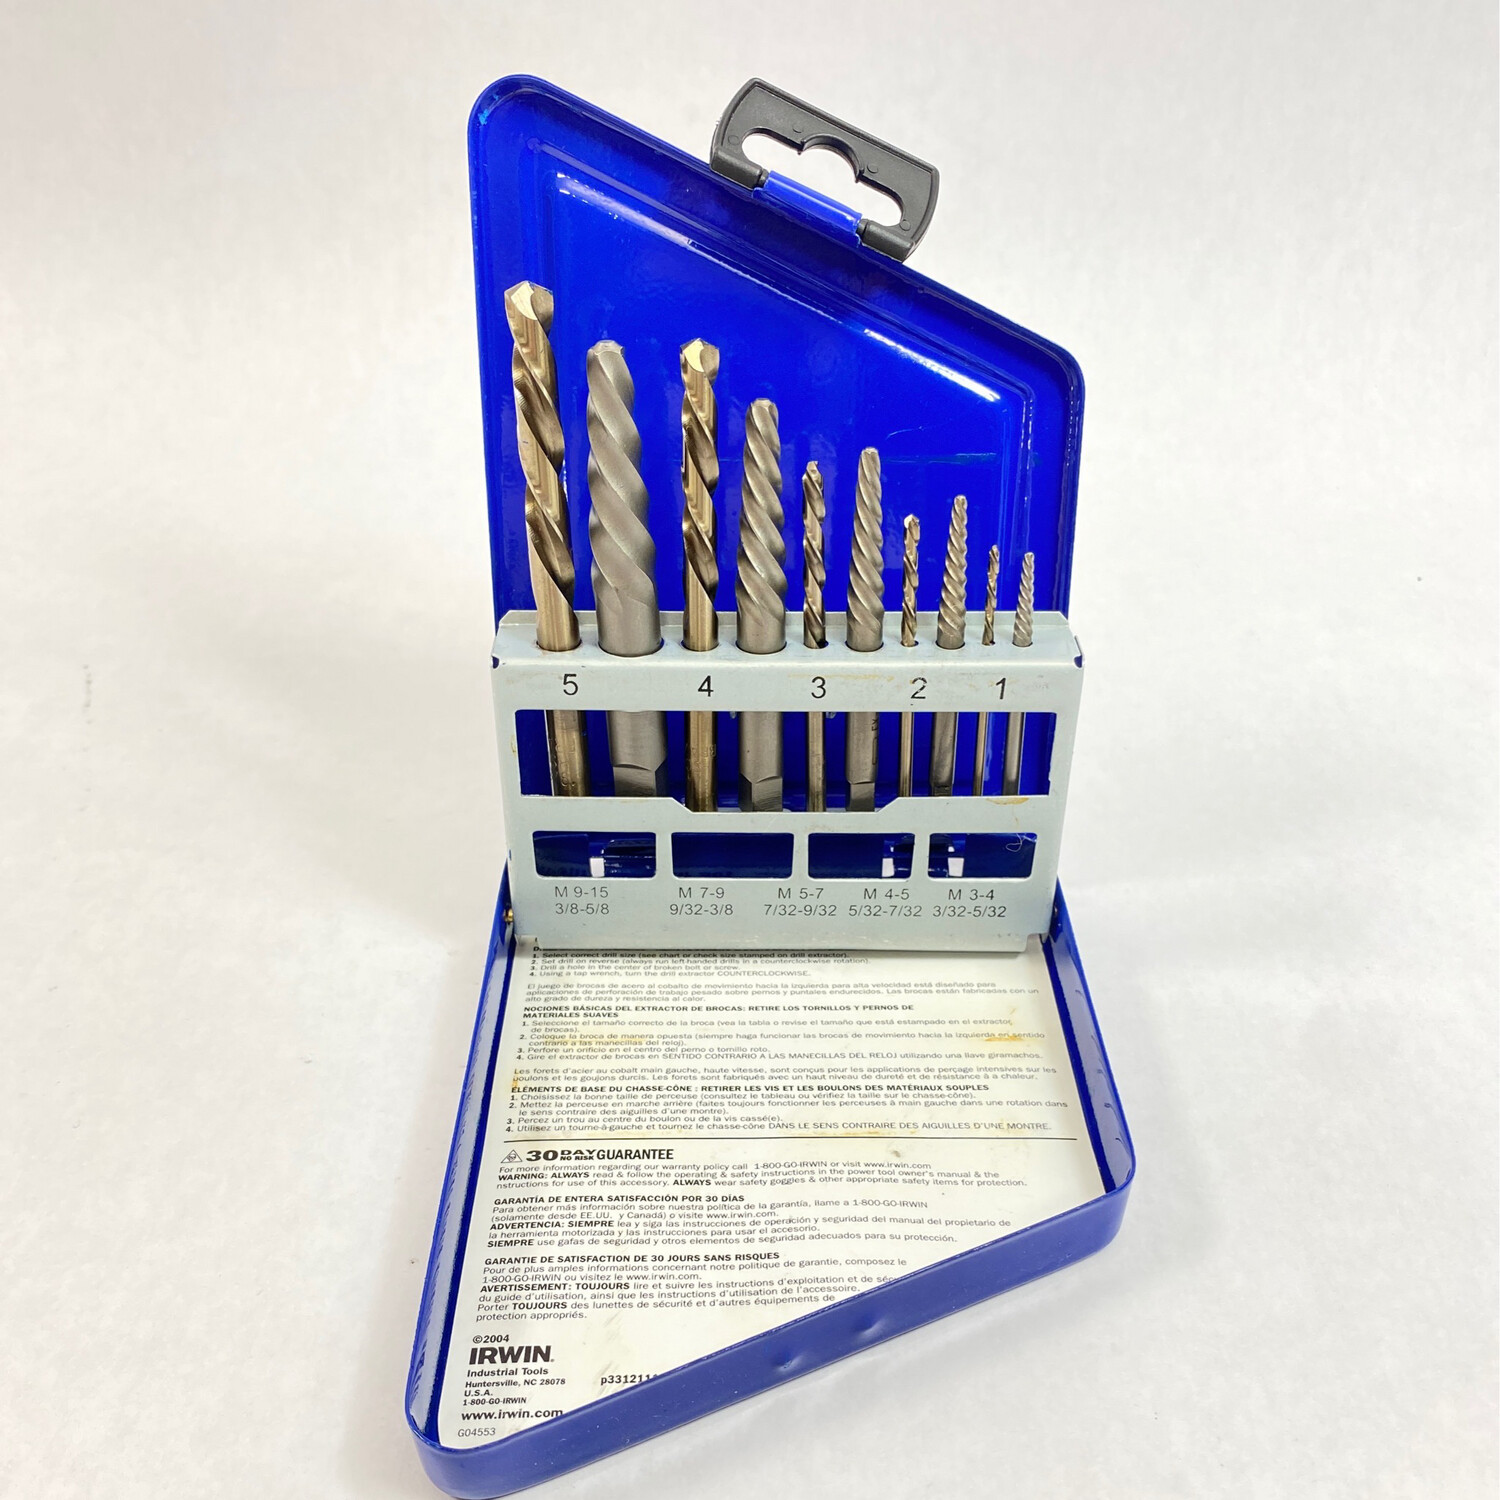 Hanson 10 Pc. Extractor And Drill Set Left Handed Cobalt Drills, 11119